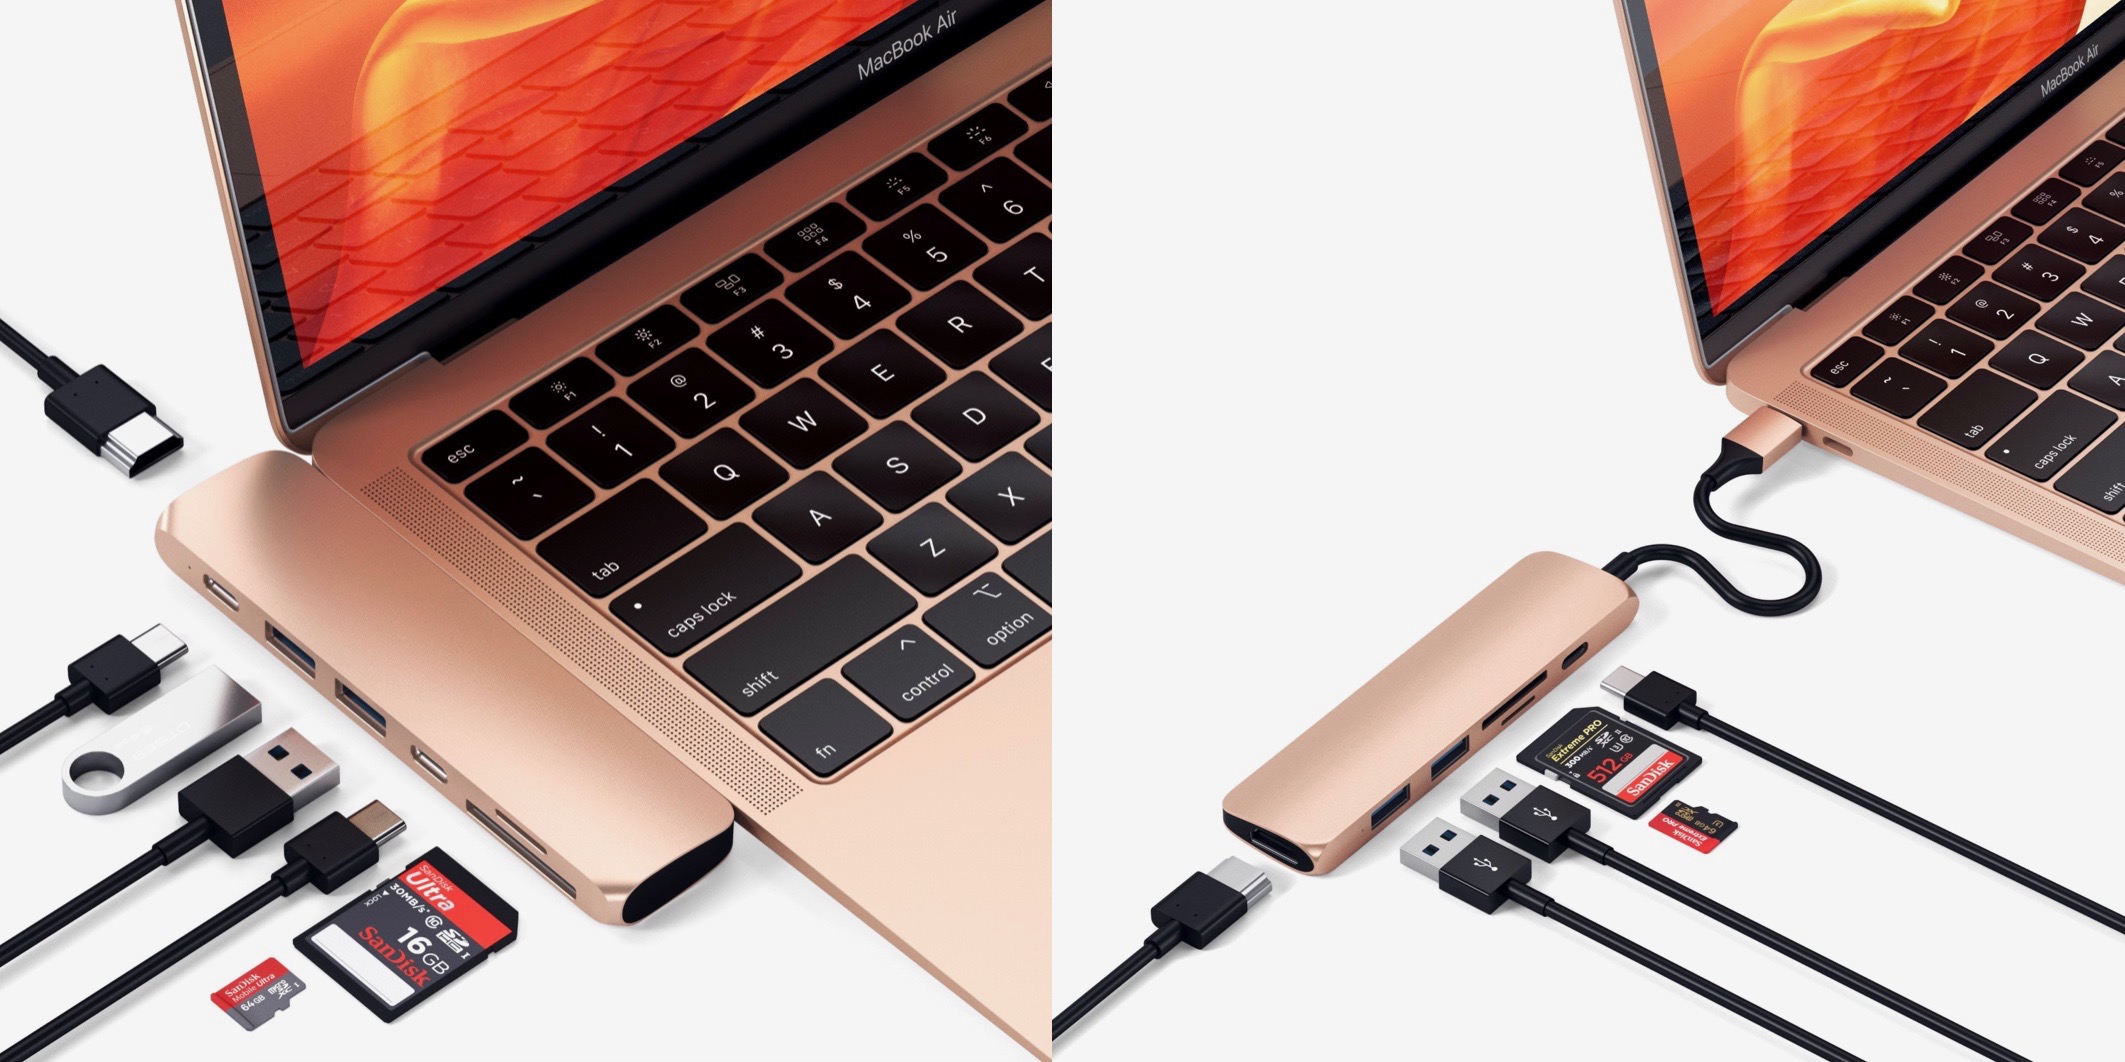 Satechi unveils new gold USB-C hub lineup to match the 2018 MacBook Air -  9to5Mac